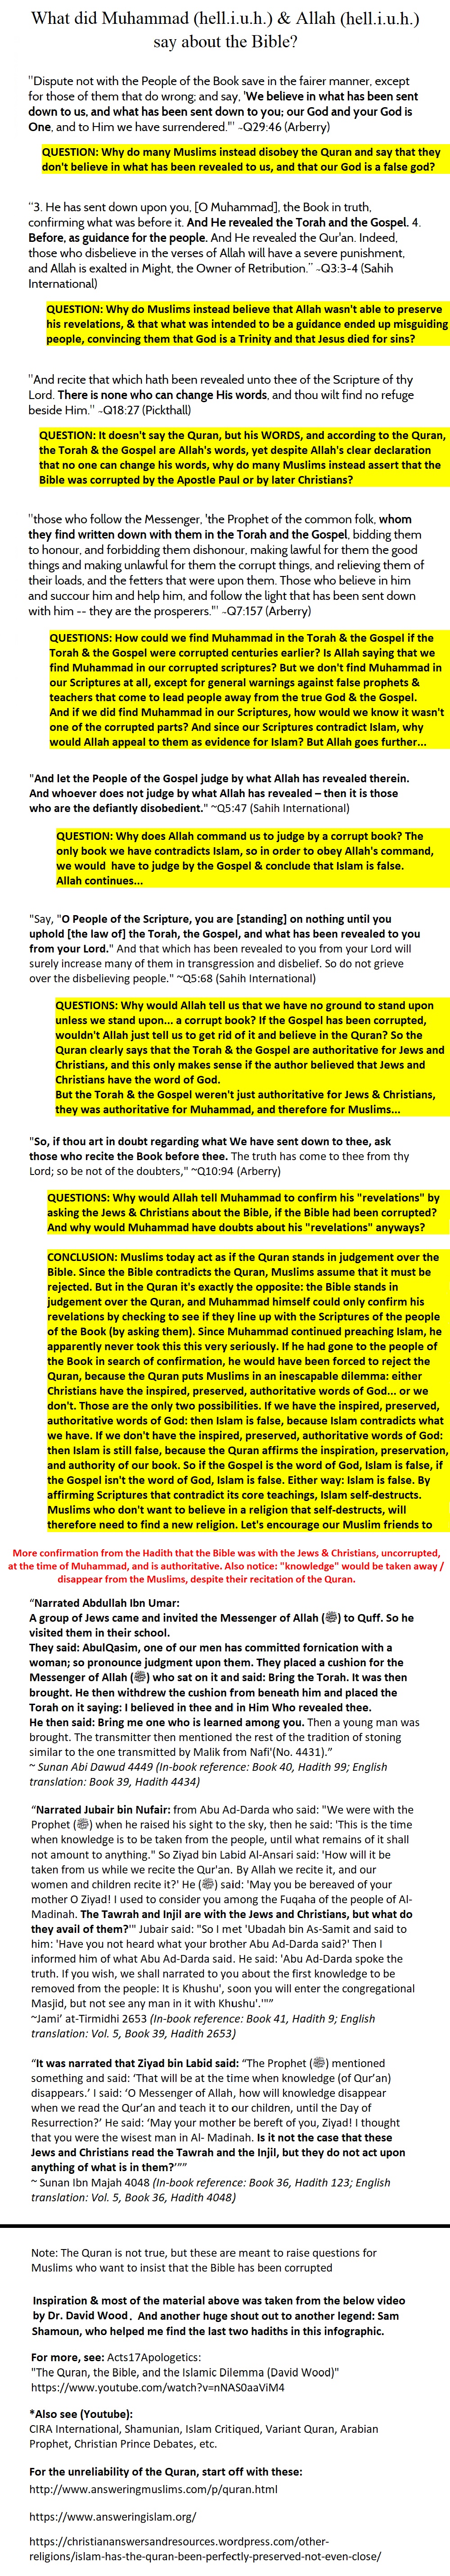 The Quran self-destructs by claiming to affirm and confirm the Bible, and that the Bible is inspired, preserved, and authoritative over Jews, Christians, and Muslims. These are just some sample verses. Muhammad also said that the Jews and Christians HAD the Torah5 5and the Gospel at that time (and that knowledge would pass away from the Muslims despite reciting the Quran). Quran 29:46, Quran 3:3-4, Quran 18:27, Quran 7:157, Quran 5:47, Quran 5:68, Quran 10:94, (also see Quran 4:136), Sunan Abi Dawud 4449 (in-book reference: Book 40, Hadith 99, English translation: Book 39, hadith 4434), Jami' at-Tirmidhi 2653 (in book reference: book 41, hadith 9, English translation: vol 5, book 39, hadith 2653), Sunan Ibn Majah 4048 (in book reference: book 36, hadith 123, English translation: vol 5, book 36, hadith 4048). Furthermore, not noted in this infographic, any passage modern Muslims try to bring up to say that the Bible has been corrupted, would be contradicting all of these passages, but these passages do not say that the text of the Bible (nor specifically the Gospel) have been corrupted, most have to do with a group of Jews at some point misinterpreting the text, etc, and no group of Jews at any time would have had the power to wholesale corrupt the Old Testament, neither would Christians the Gospel, as both the Old and New Testaments were widely dispersed across multiple continents and in multiple languages at the time of Muhammad.